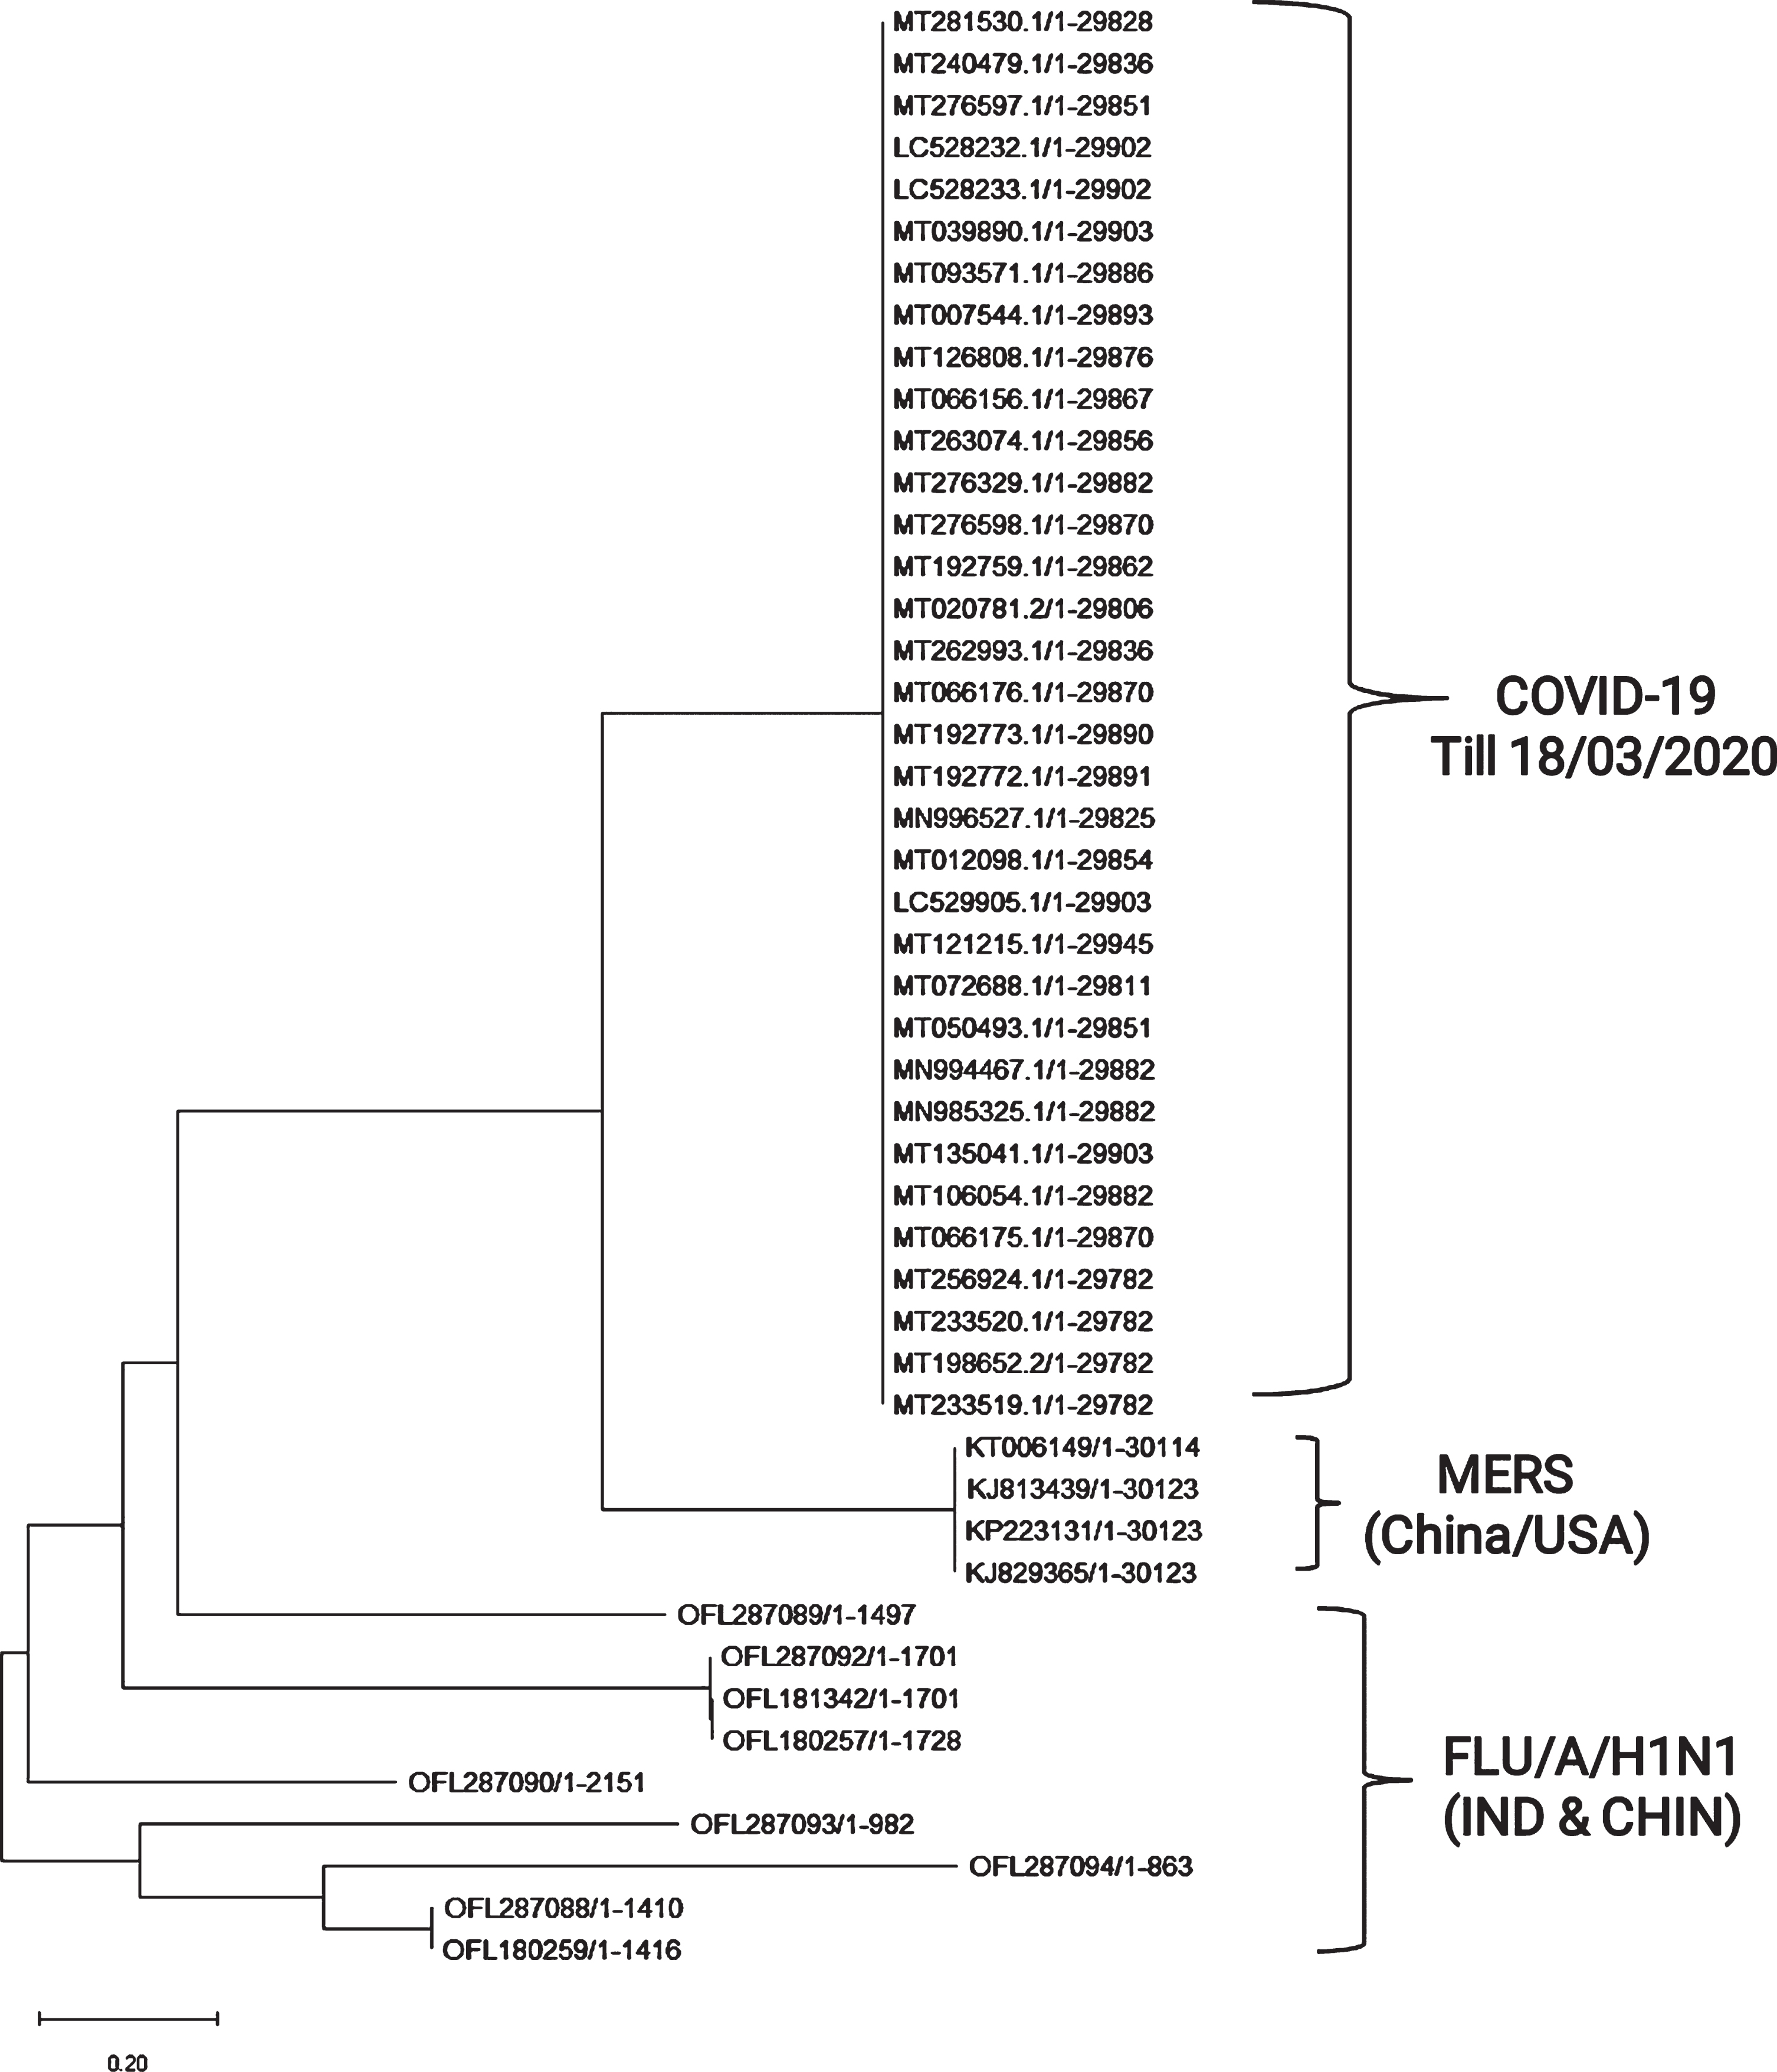 Phylogenetic analysis of nCoV, MERS and H1N1 (influenza virus): The 34 complete genome sequences of nCoV were compared with 4 MERS sequences and 9 H1N1 sequences in order to build a phylogenetic tree in the MEGA-X software using the Maximum Likelihood method and Tamura-Nei model [18, 19]. In the analysis the codon positions included were 1st, 2nd, 3rd and the non-coding regions. There was a total of 29945 positions in the final dataset. The default settings were used for the analysis.